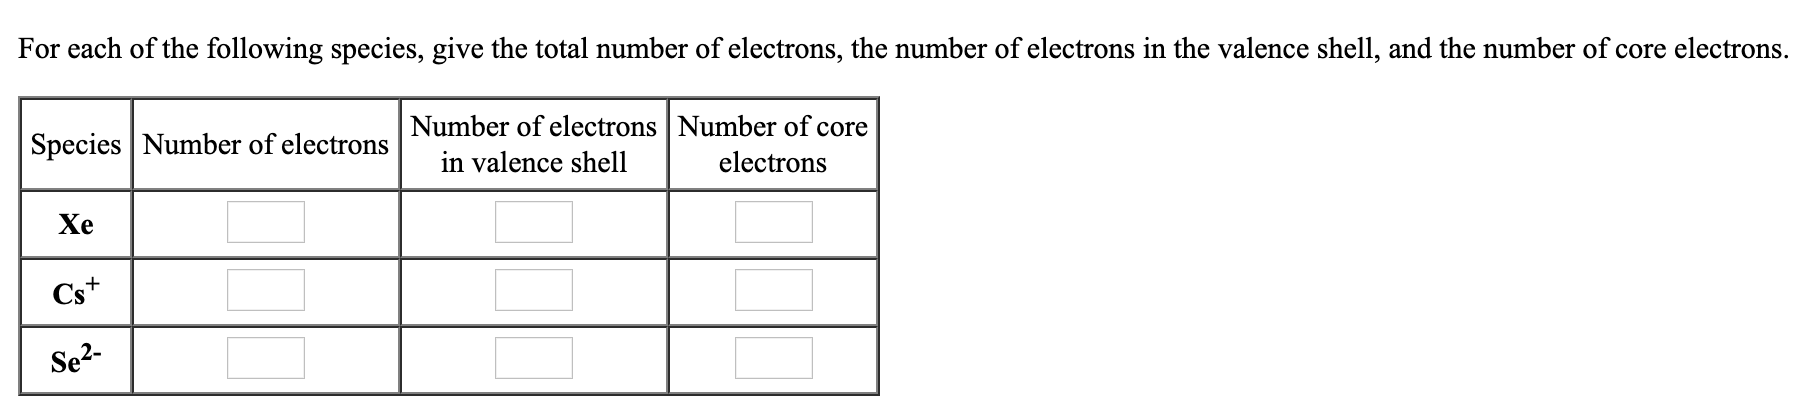 For each of the following species, give the total number of electrons, the number of electrons in the valence shell, and the number of core electrons.
Species Number of electrons
Number of electrons Number of core
in valence shell
electrons
Xe
Cs+
Se2-
